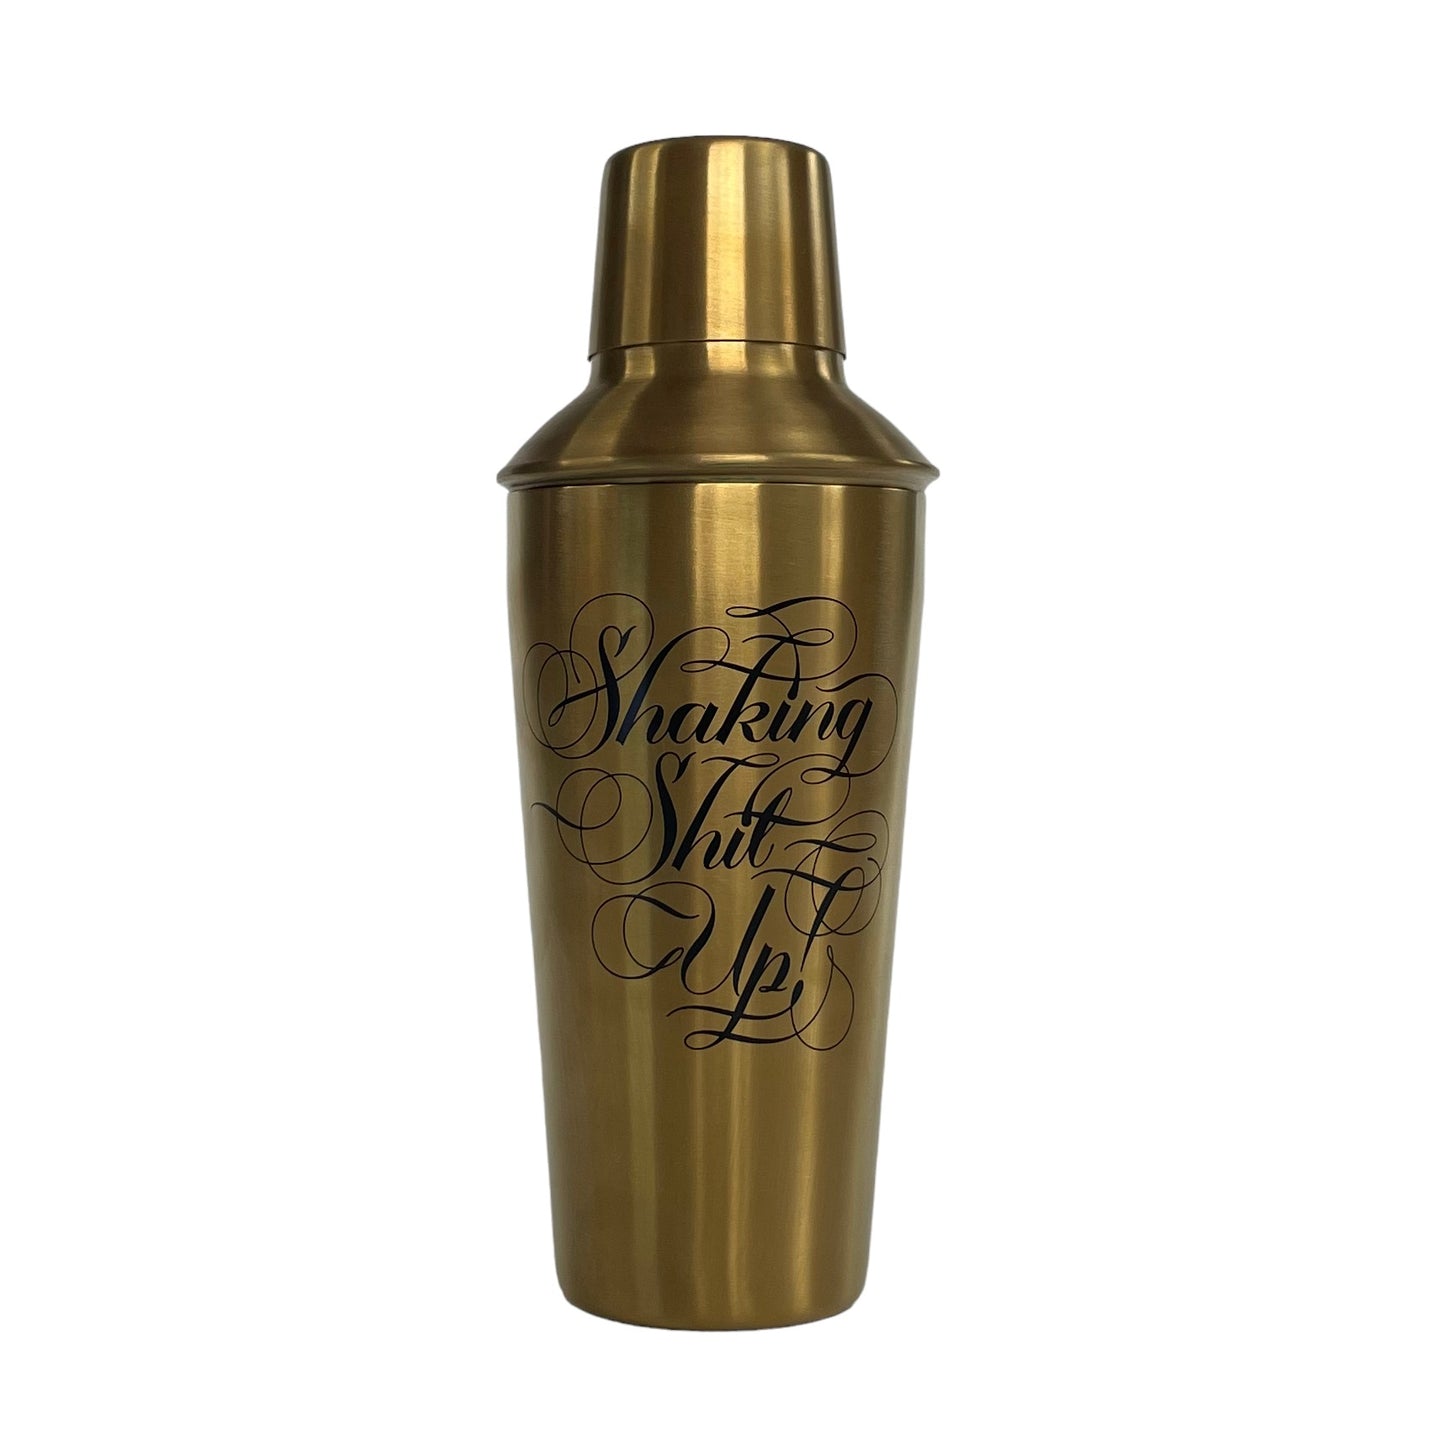 "Shake Sh*t Up" Cocktail Shaker in gold